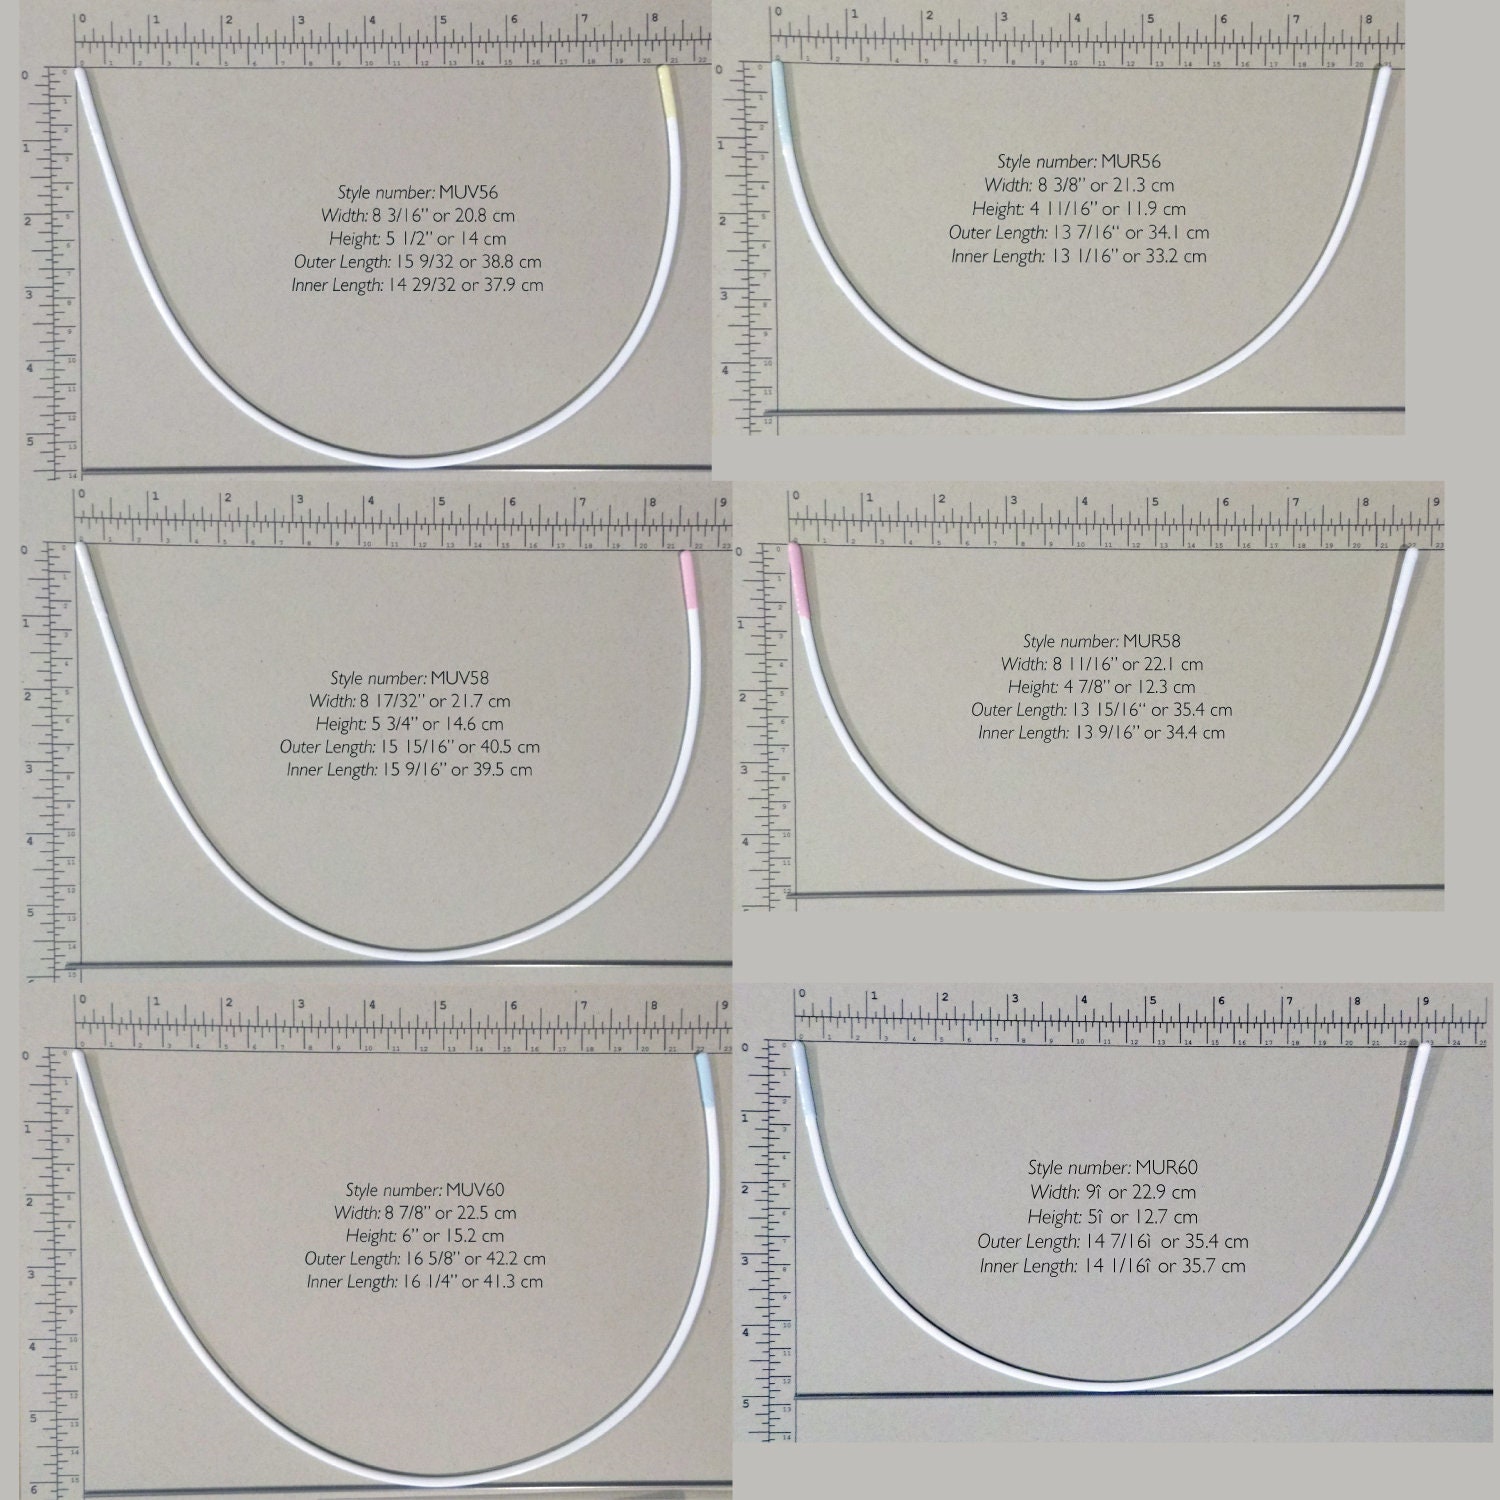 White Bra Making Replacement Hook and Eye Tape Closures - 2 Rows - 1 1/2  Wide - Lingerie Design, DIY Bra Supplies (HE132W)